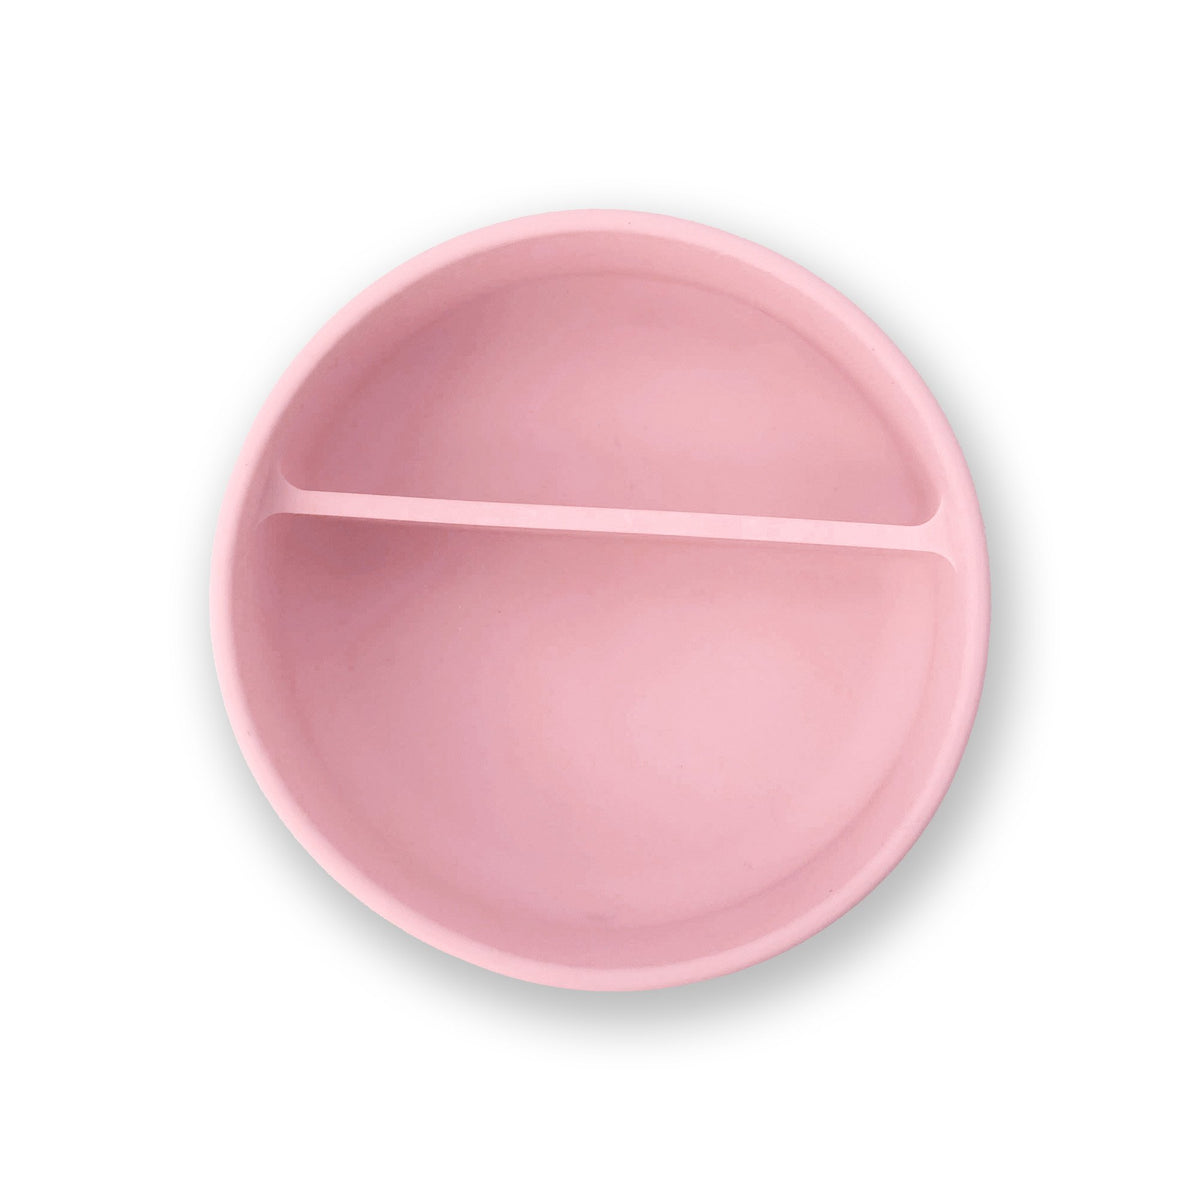 grabease-silicone-suction-bowl-pink- (3)